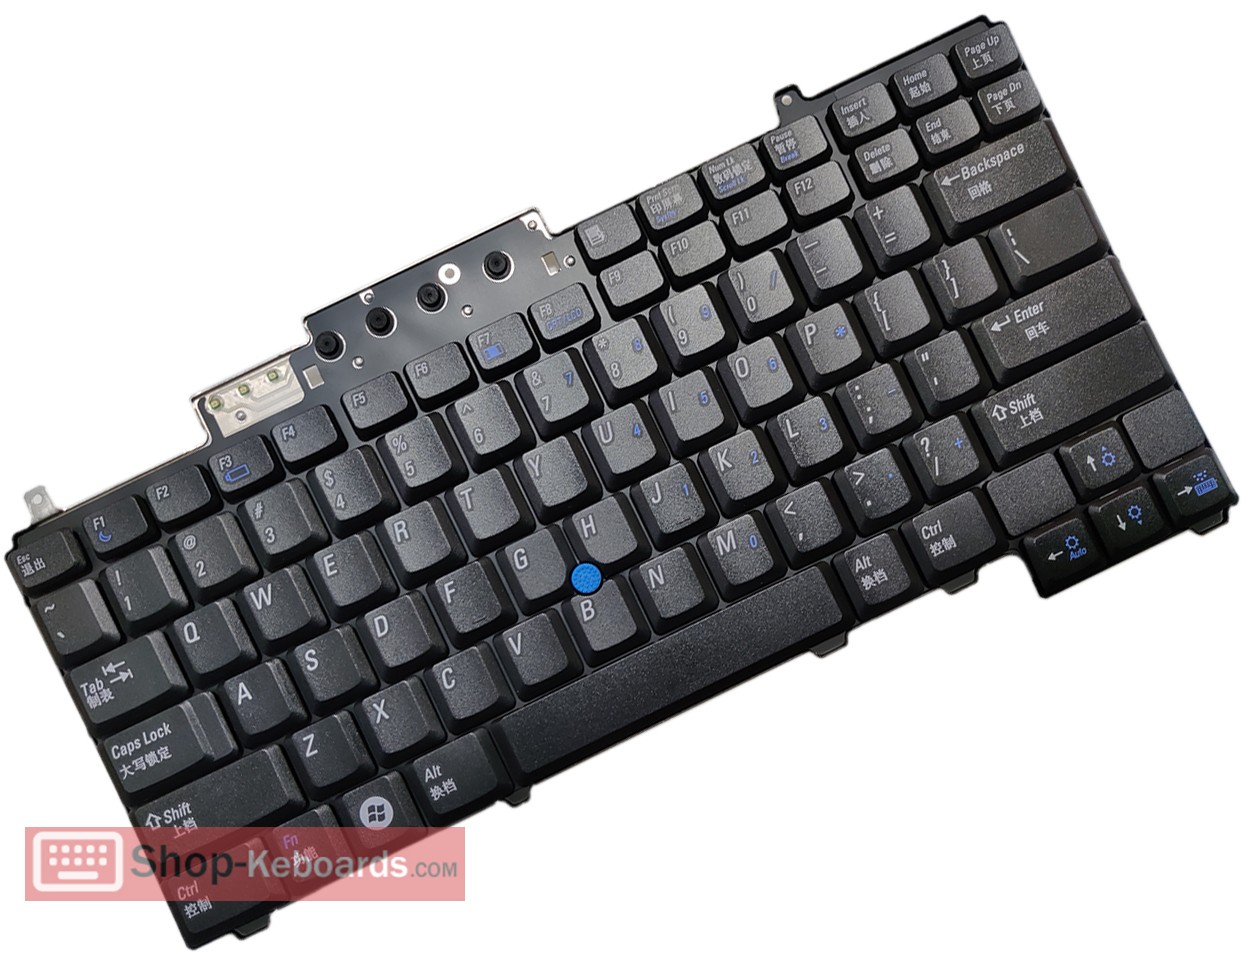 Dell Latitude D620 ATG Keyboard replacement